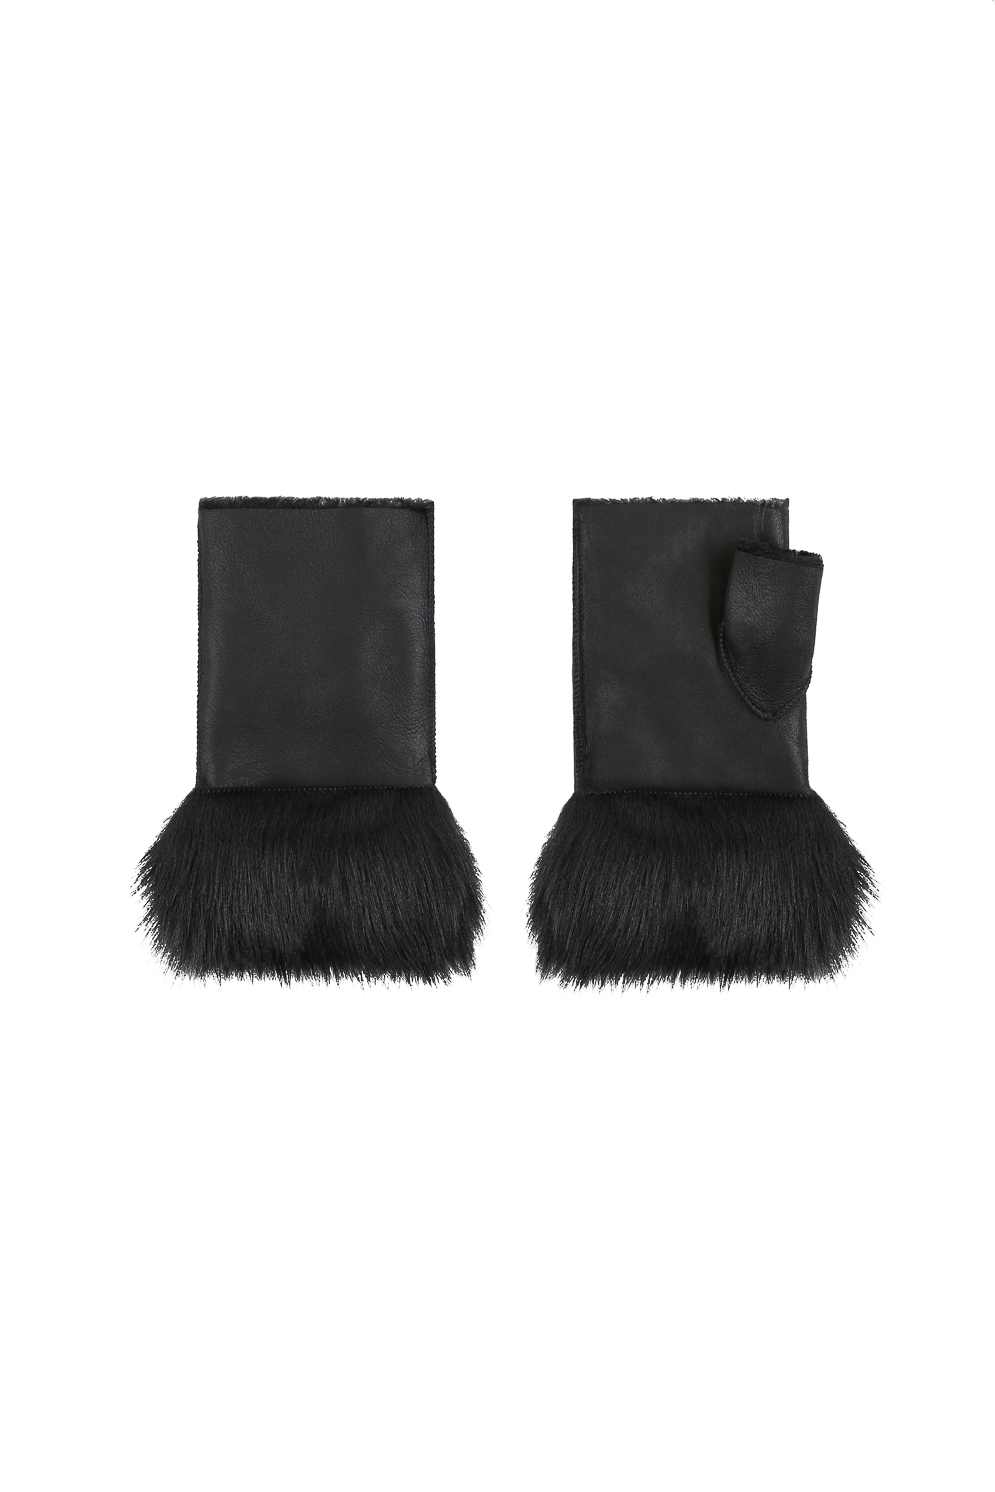 gushlow-and-cole-cuffed-mini-shearling-mittens-2